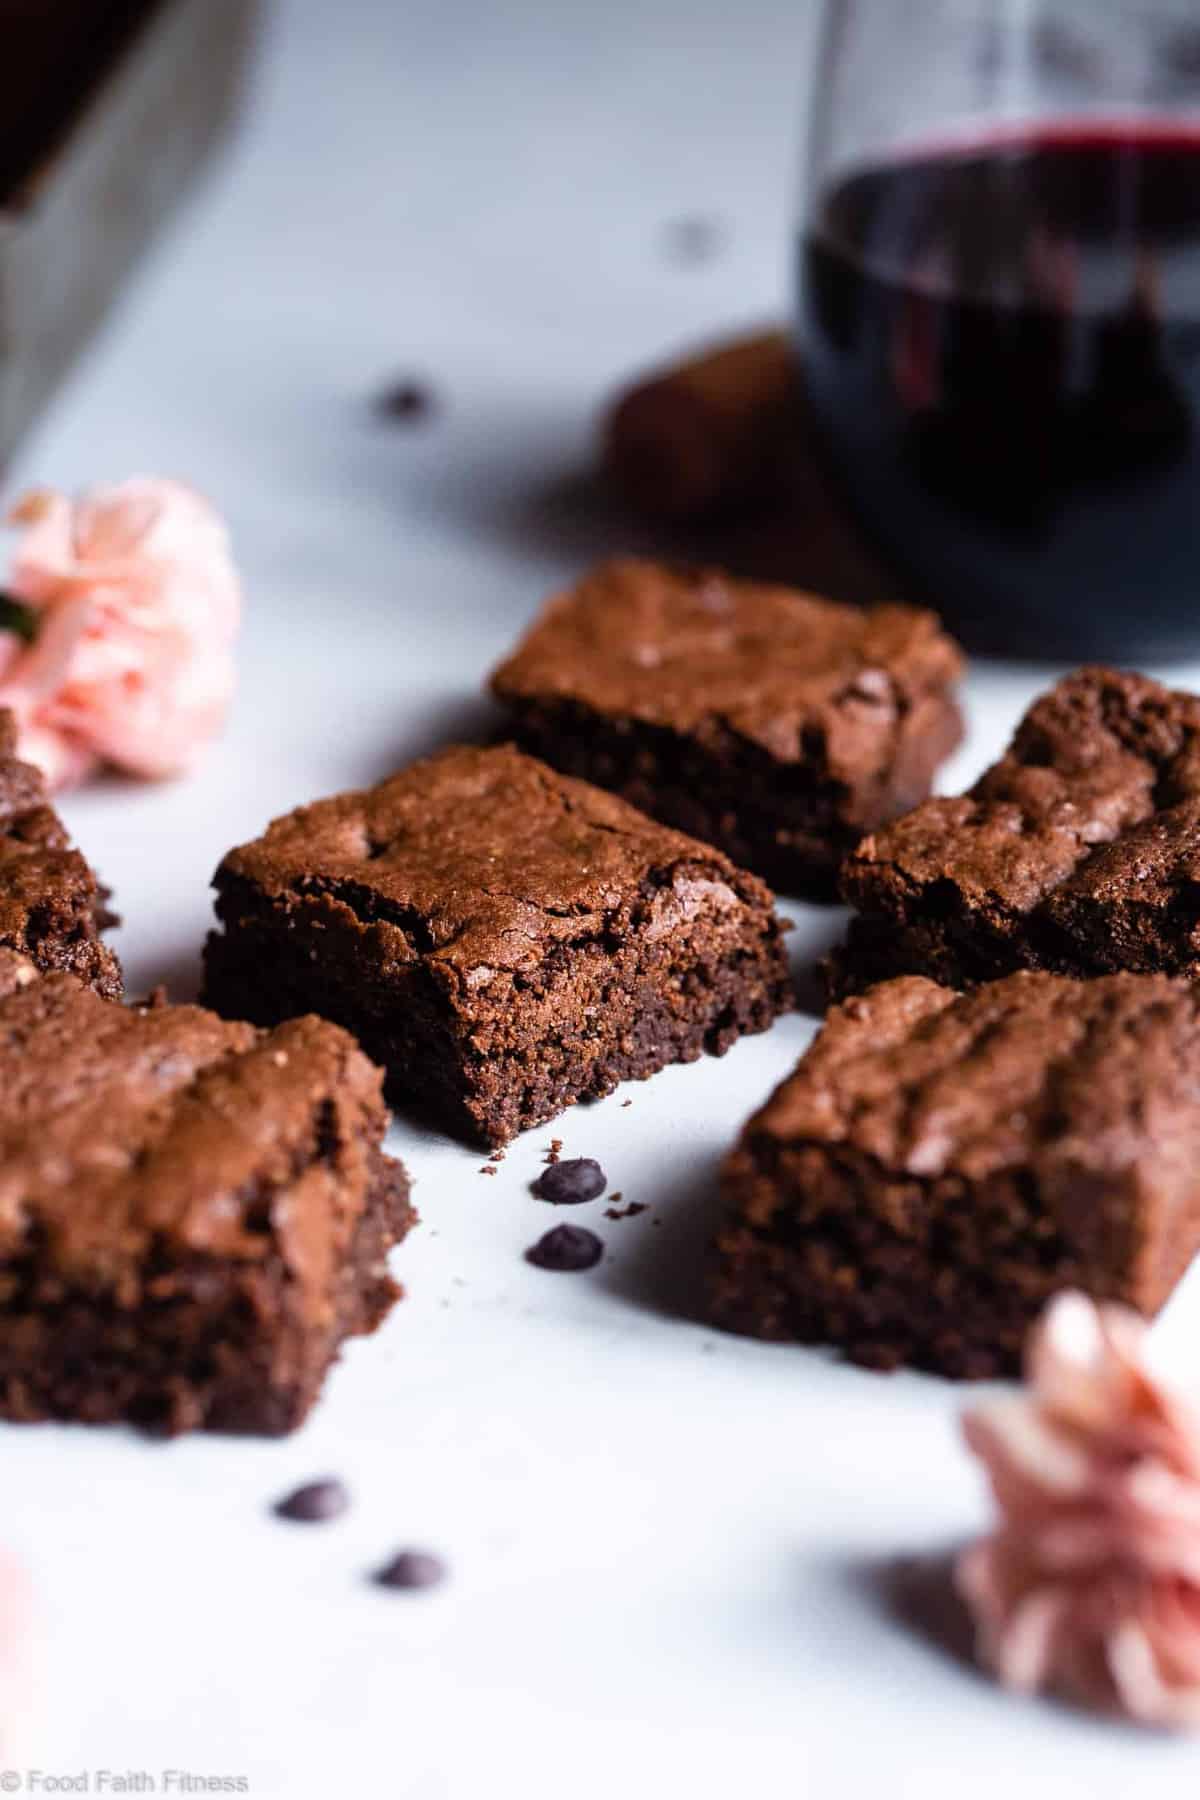 Easy Gluten Free Dairy Free Brownies - These grain free, healthy, gluten free brownies come together in less than an hour and are SO dense, chewy and FUDGY! Paleo friendly, gluten and dairy free and SO delicious! | #Foodfaithfitness | #Glutenfree #Dairyfree #Paleo #Healthy #Brownies